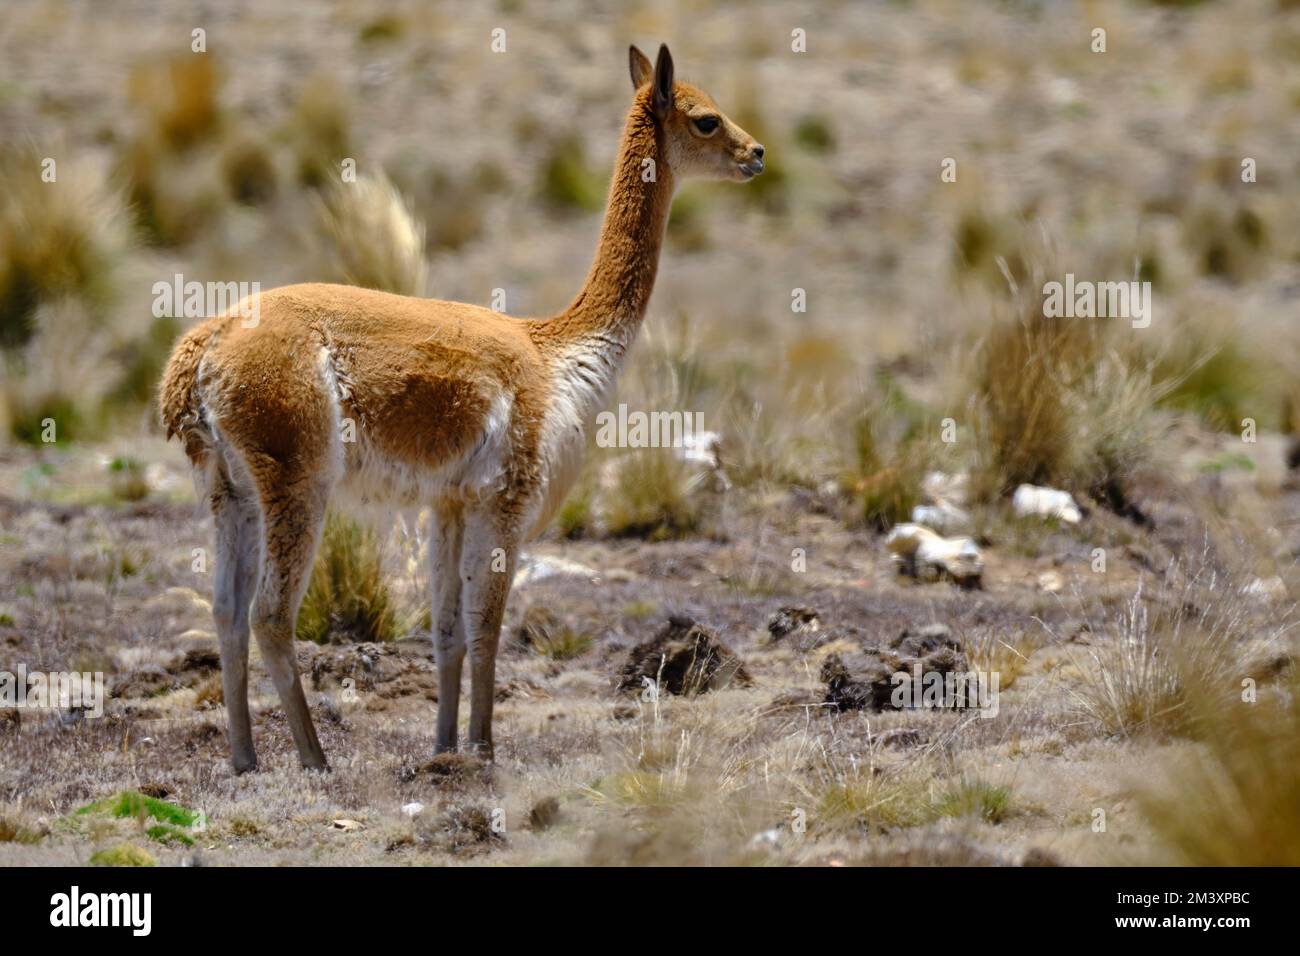 Vicuna (Vicugna vicugna) endangered animal, walking in the wild, grazing in the Andean highlands. Stock Photo